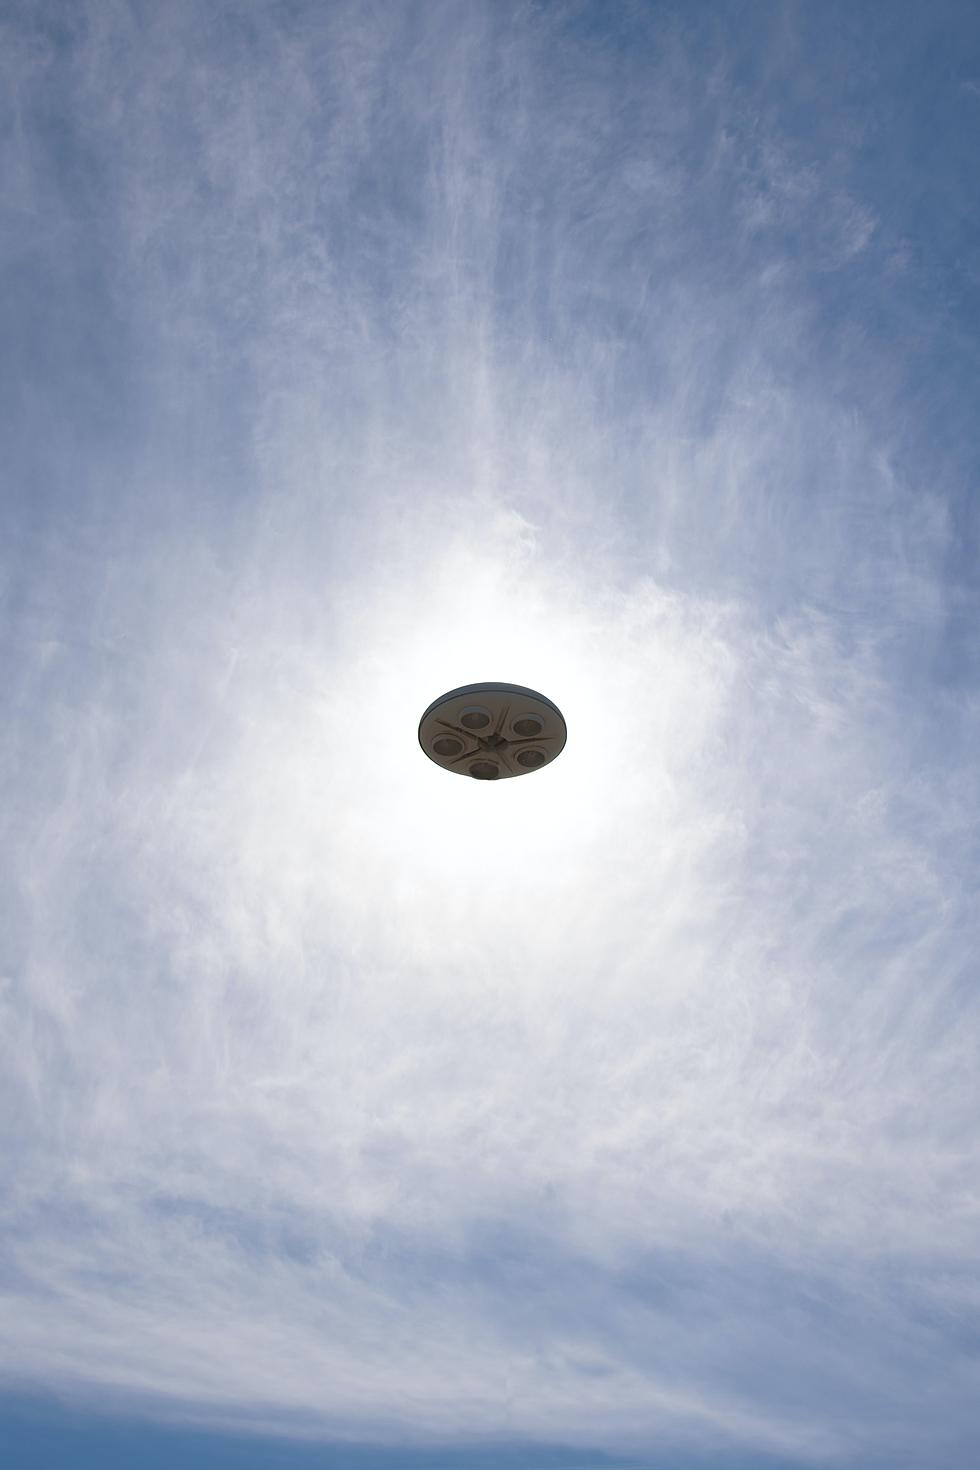 Man Claims to Have Spotted UFO Flying Above Wichita Falls, Texas